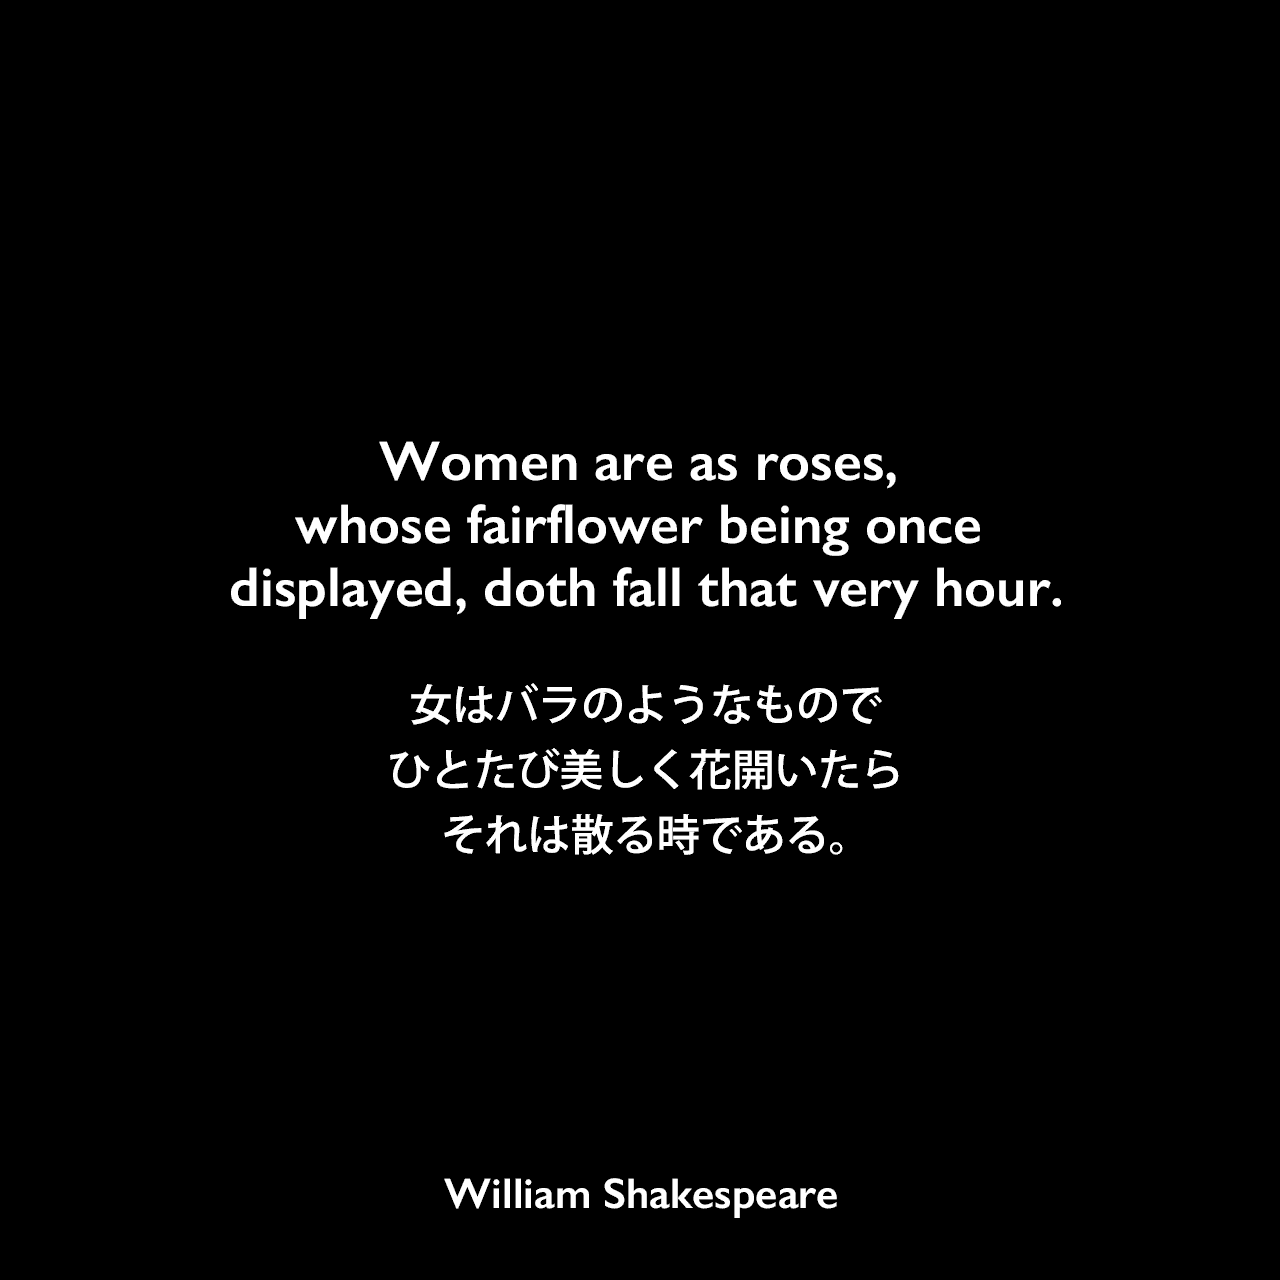 Women are as roses, whose fairflower being once displayed, doth fall that very hour.女はバラのようなものでひとたび美しく花開いたらそれは散る時である。William Shakespeare